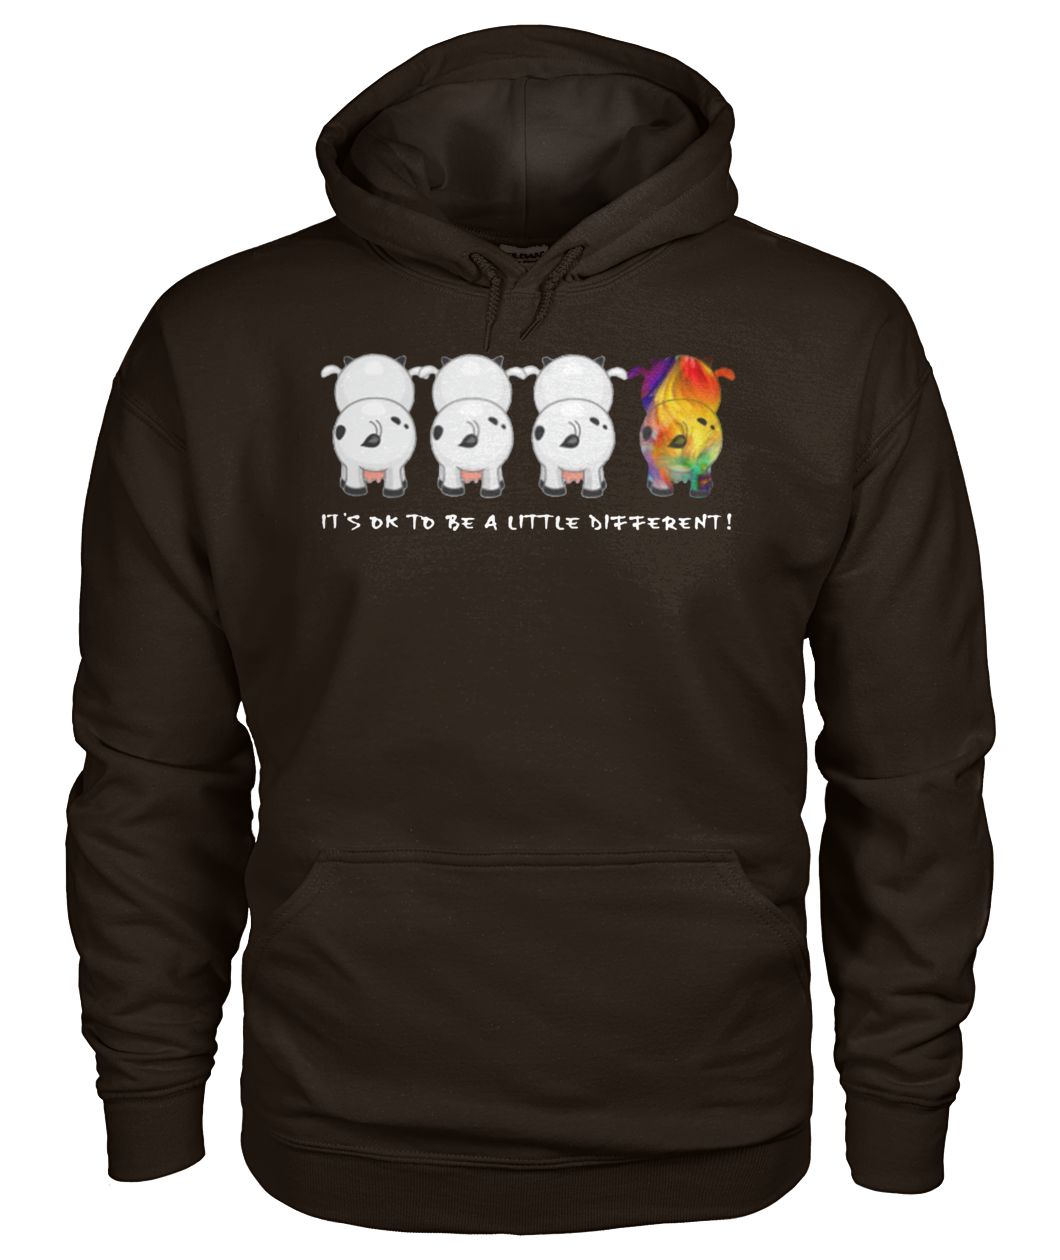 LGBT it's ok to be a little different cows gildan hoodie